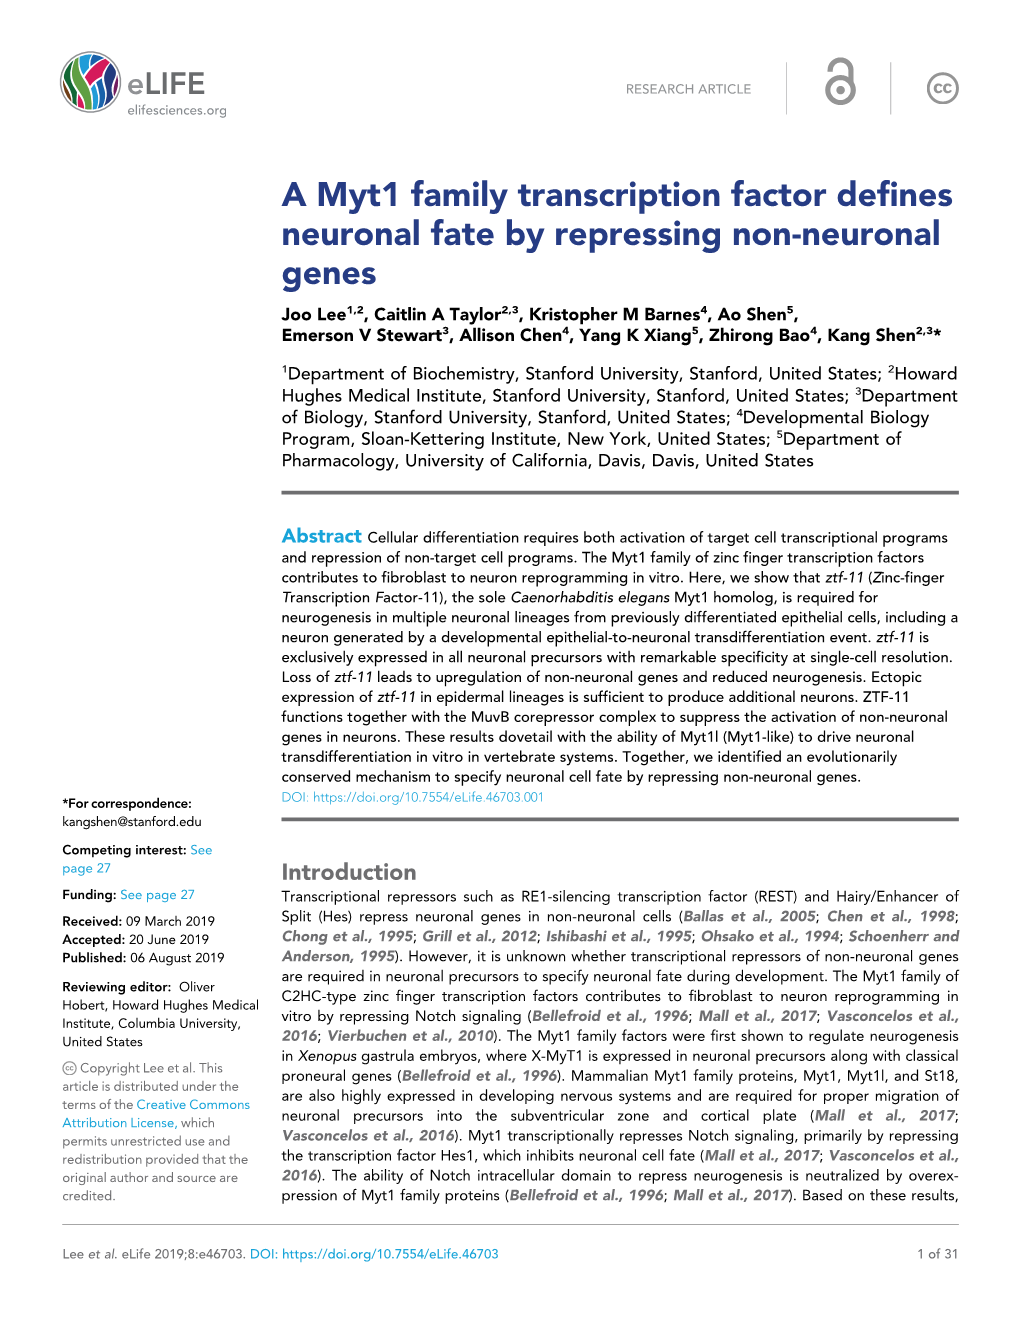 A Myt1 Family Transcription Factor Defines Neuronal Fate by Repressing